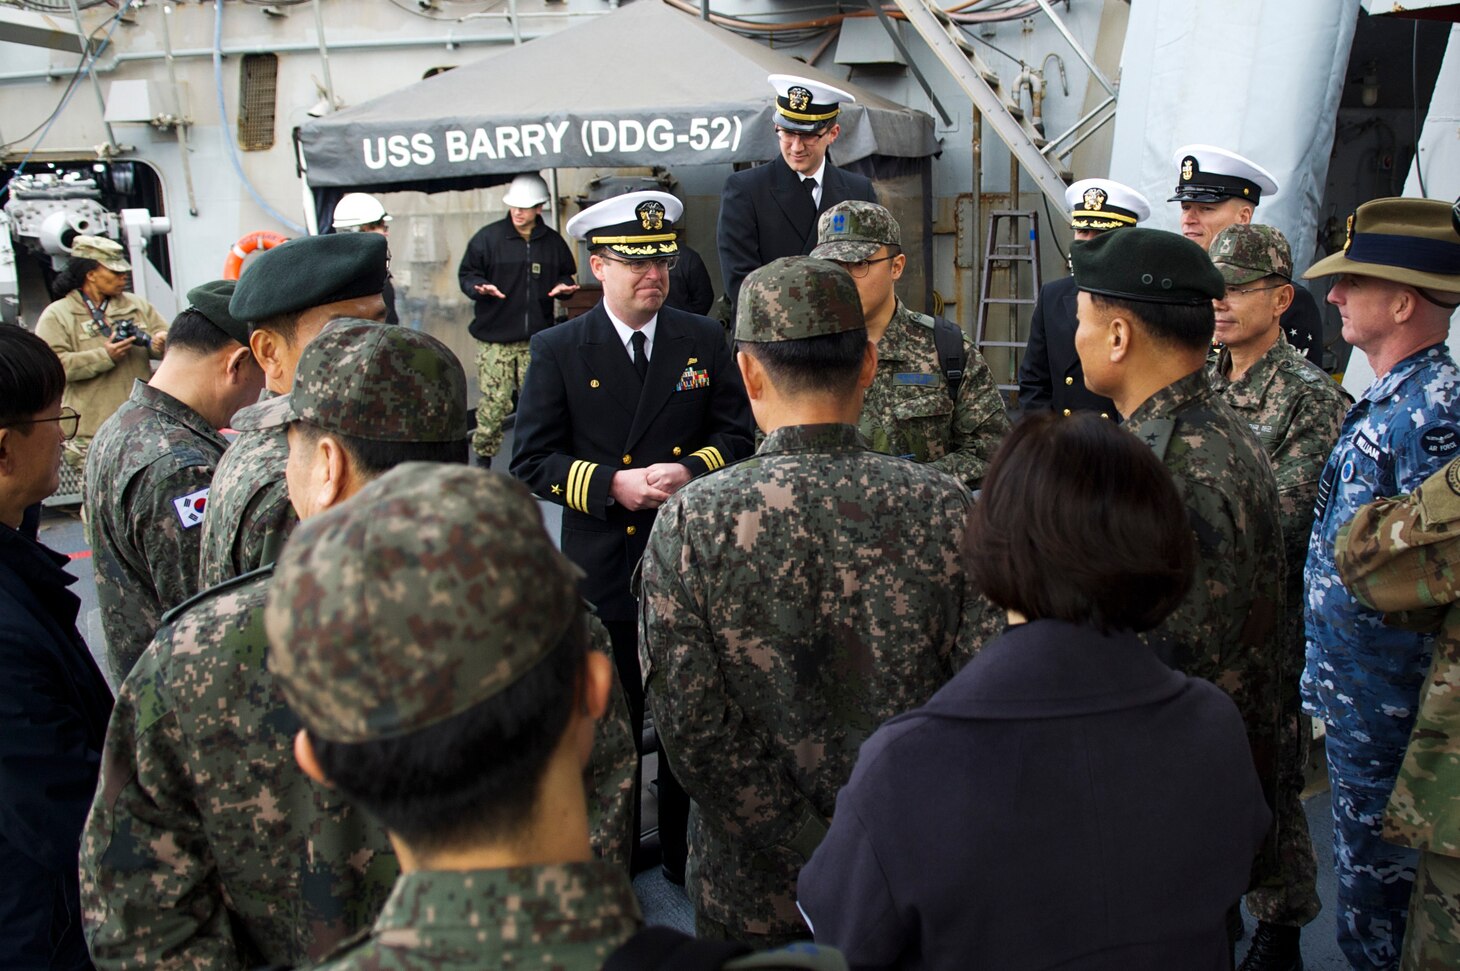 YOKOSUKA, Japan (Jan. 15, 2019) Cmdr. William C. Blodgett, the commanding officer of the Arleigh Burke-class guided-missile destroyer USS Barry (DDG 52), welcomes aboard Republic of Korea and Australia military officials aboard Barry for a ship tour. Barry is forward-deployed to the U.S. 7th Fleet area of operations in support of security and stability in the Indo-Pacific region.